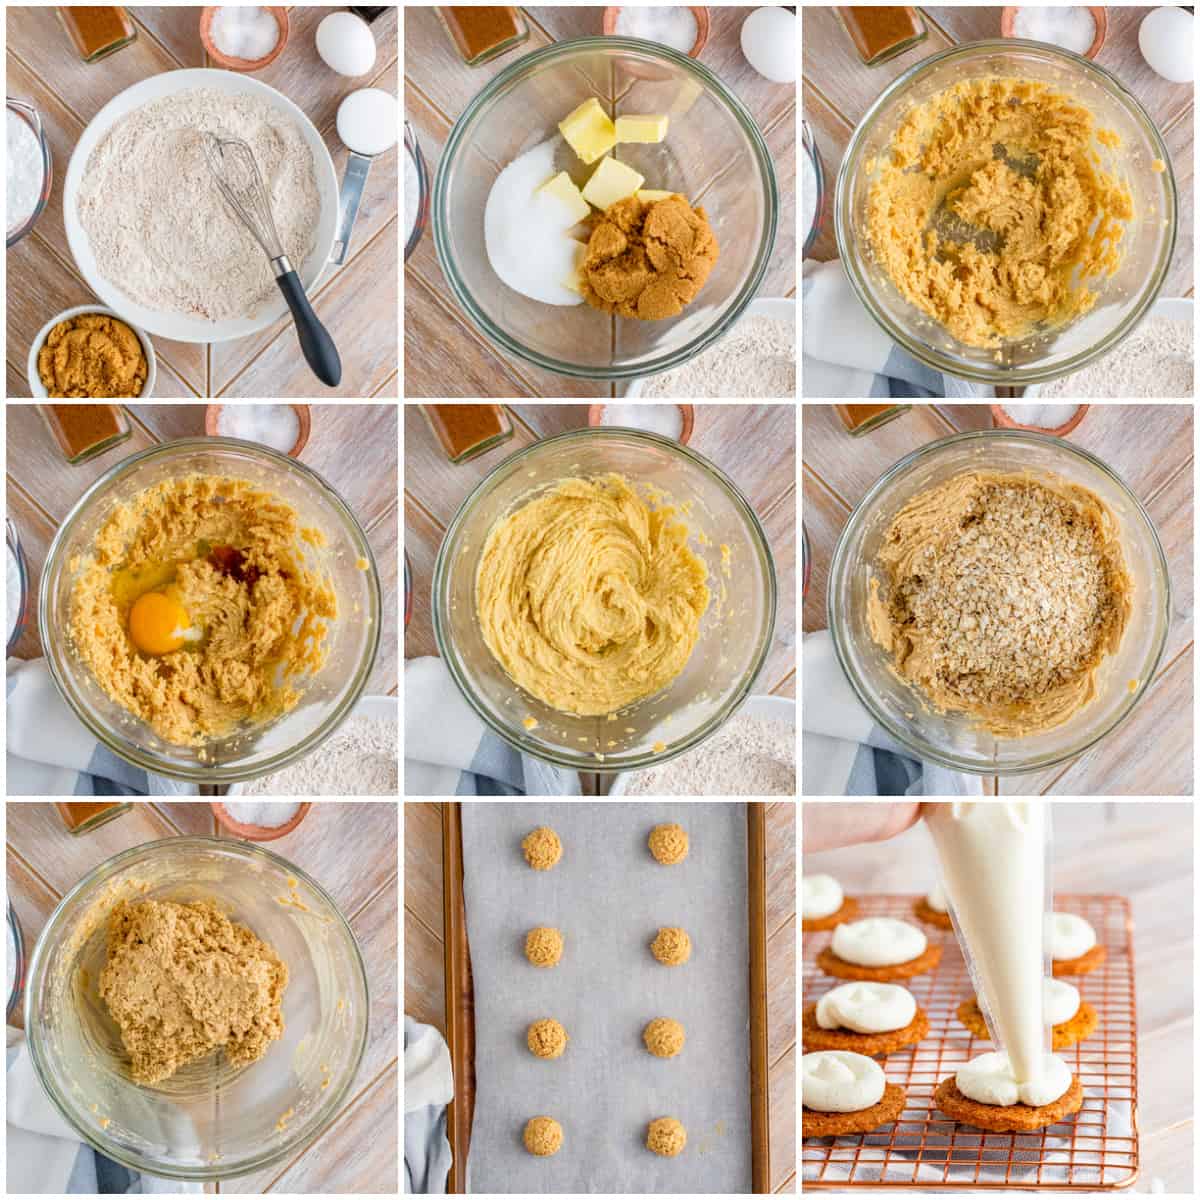 Step by step photos on how to make Oatmeal Cream Pies